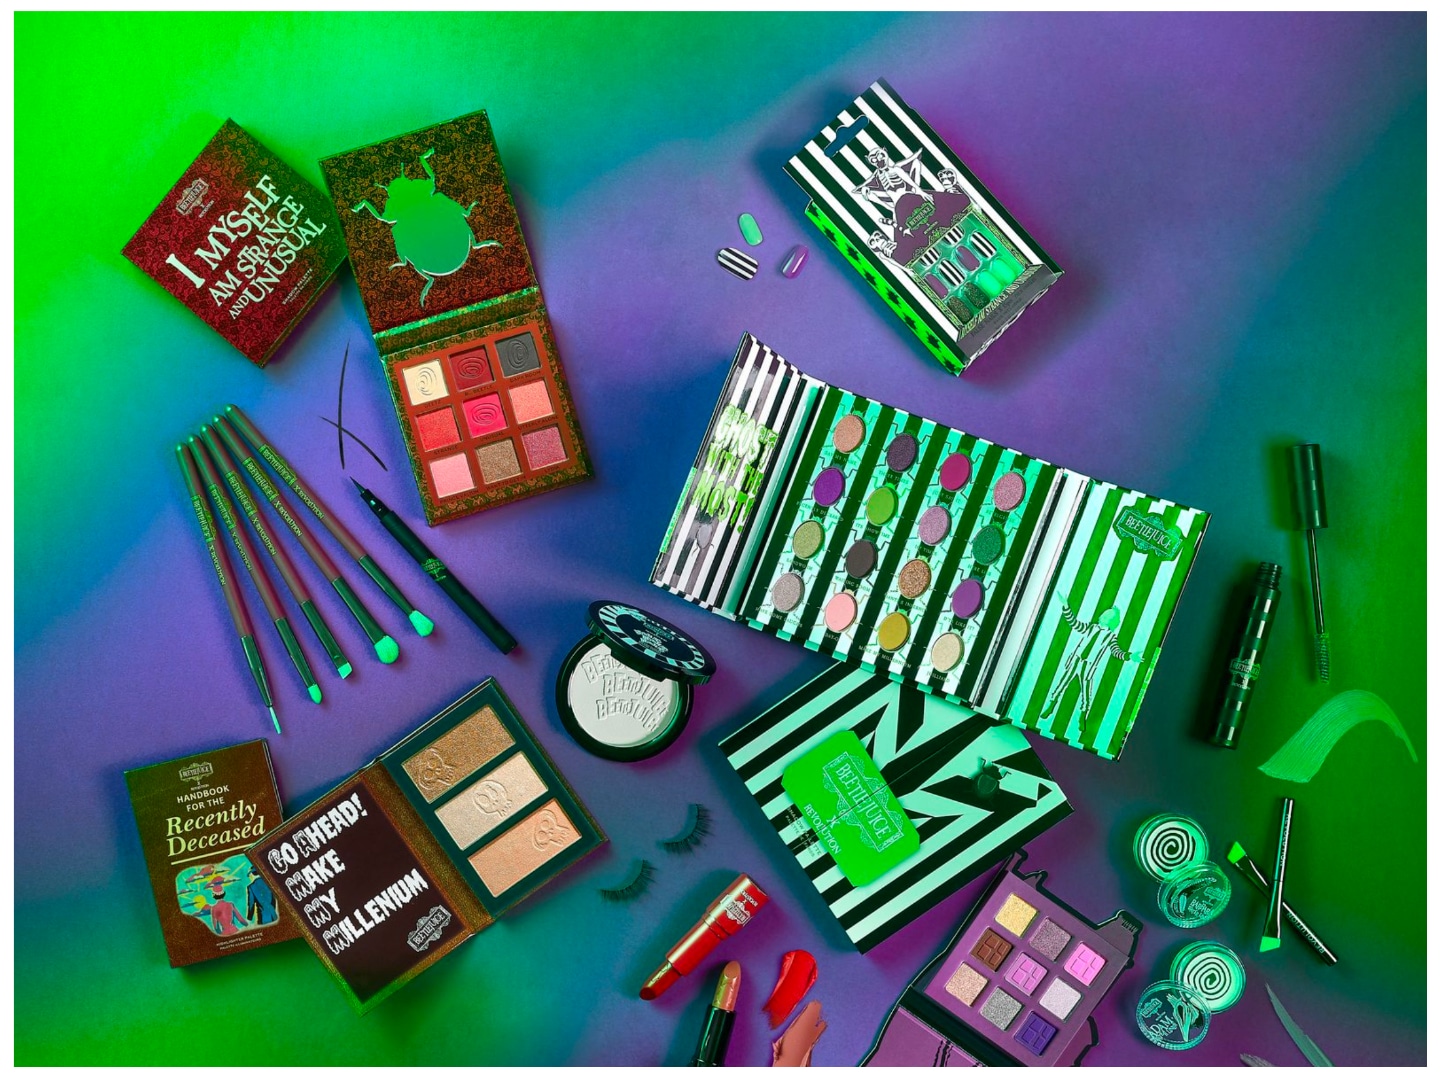 Interactie long Arthur Conan Doyle This Beetlejuice x Revolution Beauty collection is iconic